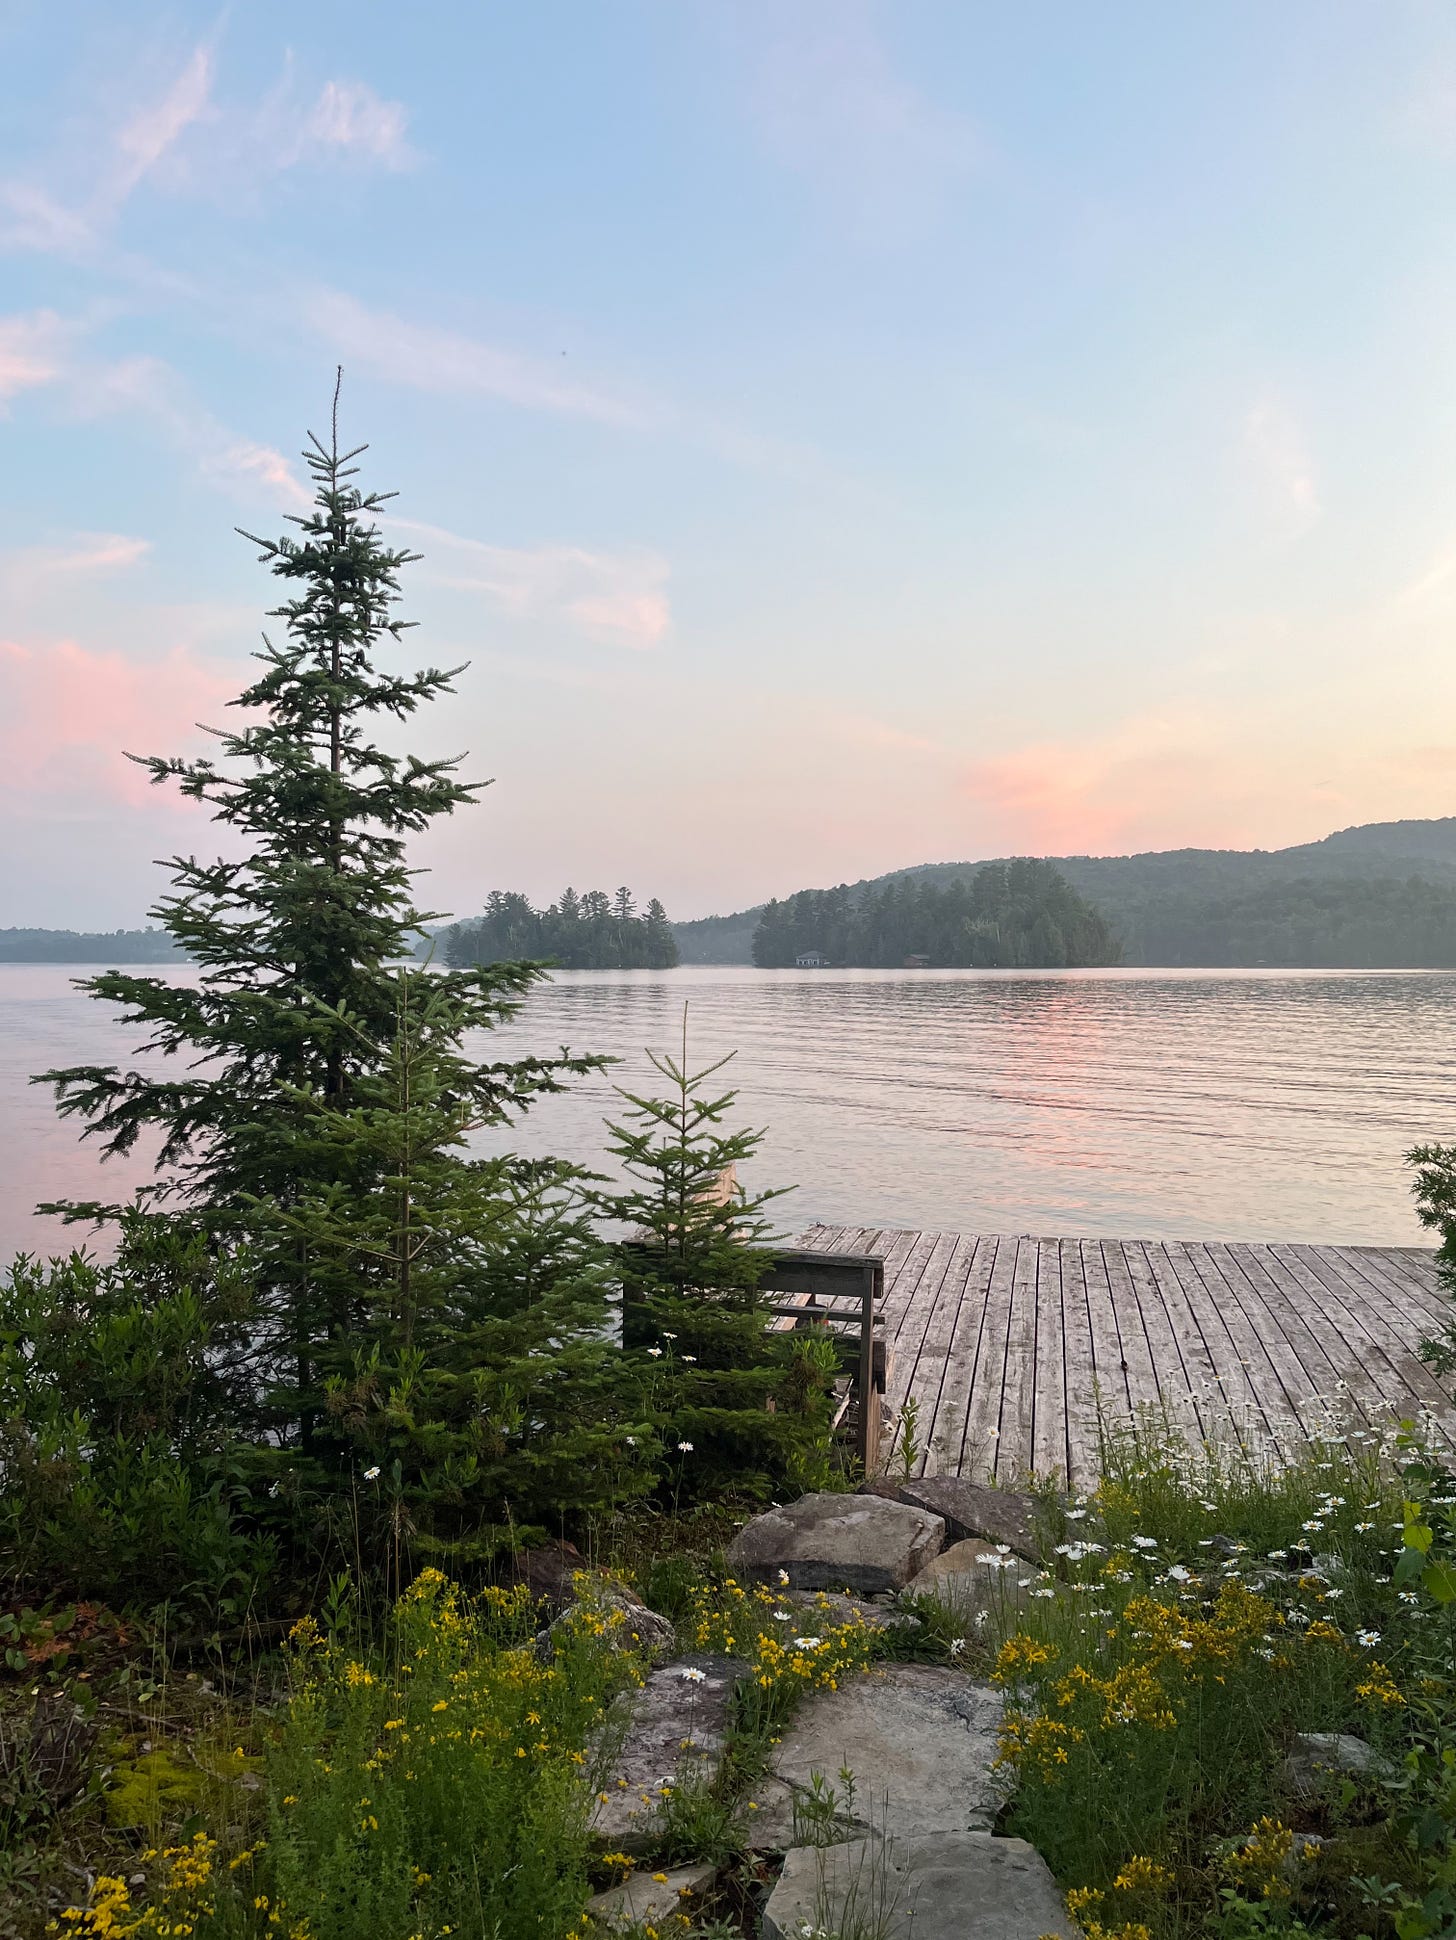 The view from the base of a wooden dock on a large, calm lake after sunset. There are wildflowers at the base of the dock and small fir trees to its left. The sky is blue with pink clouds over the opposite side of the lake.